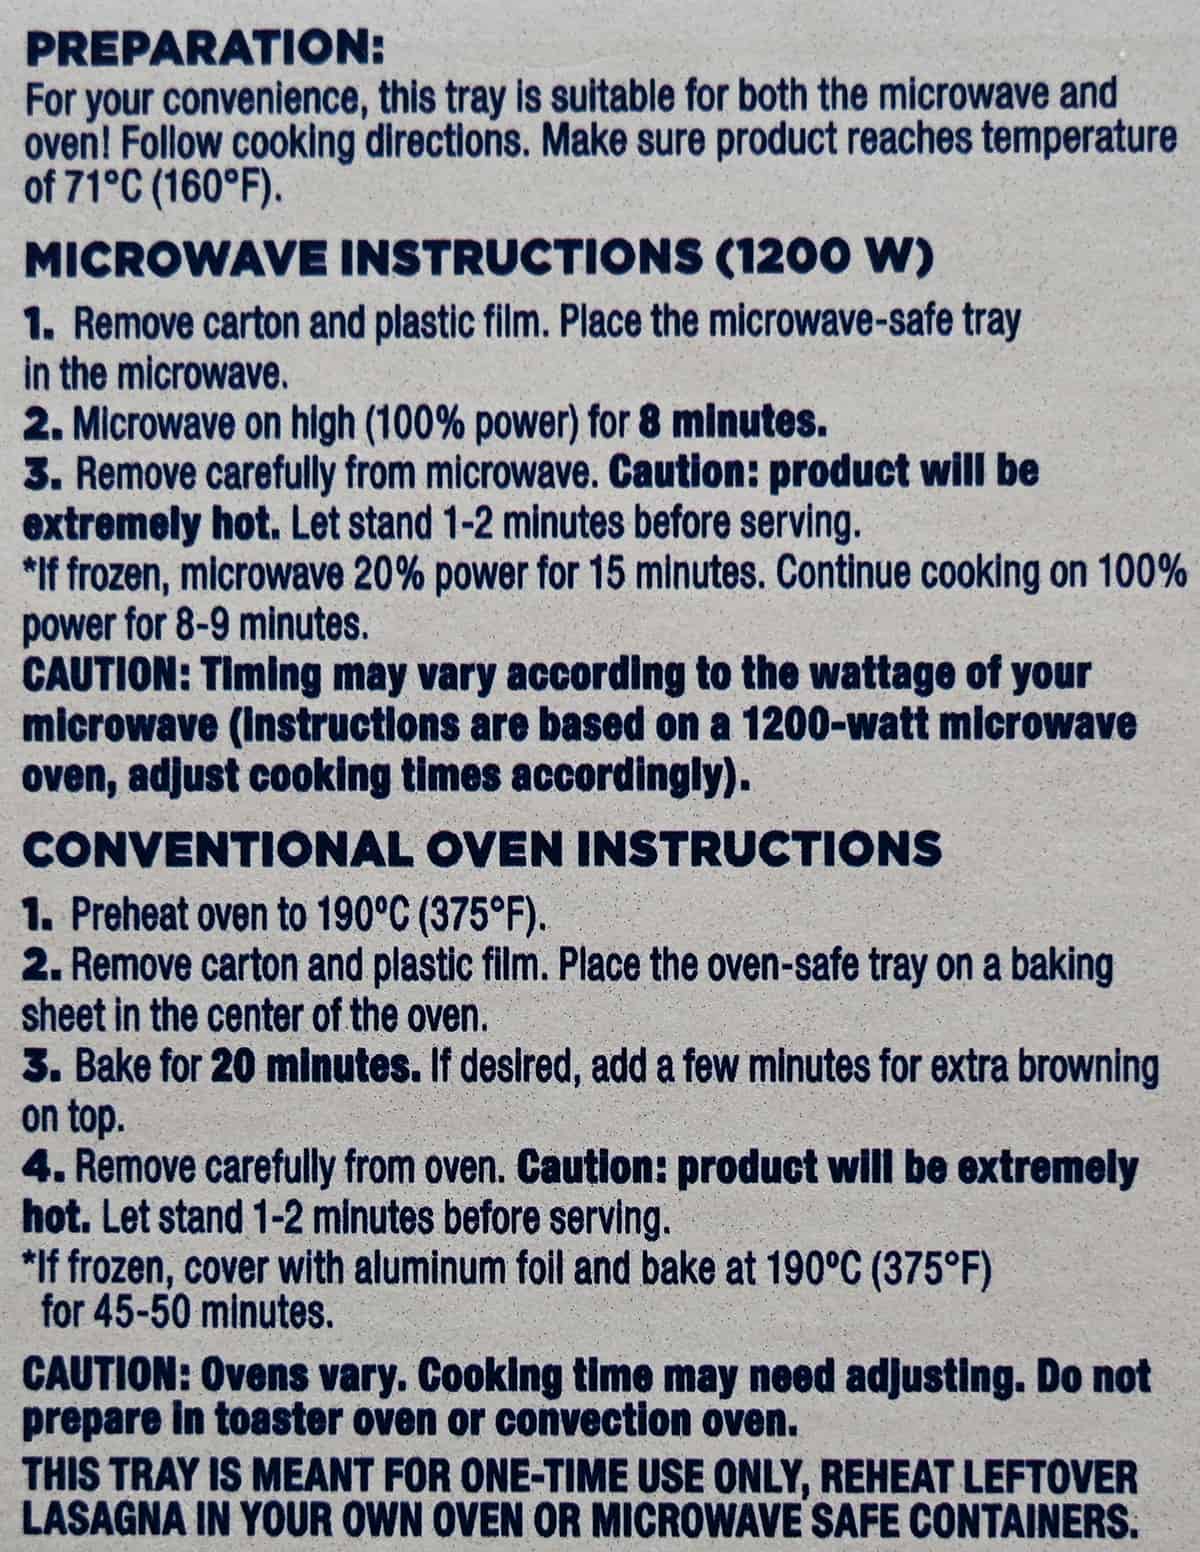 Image of the cooking instructions for the lasagna from the back of the package.